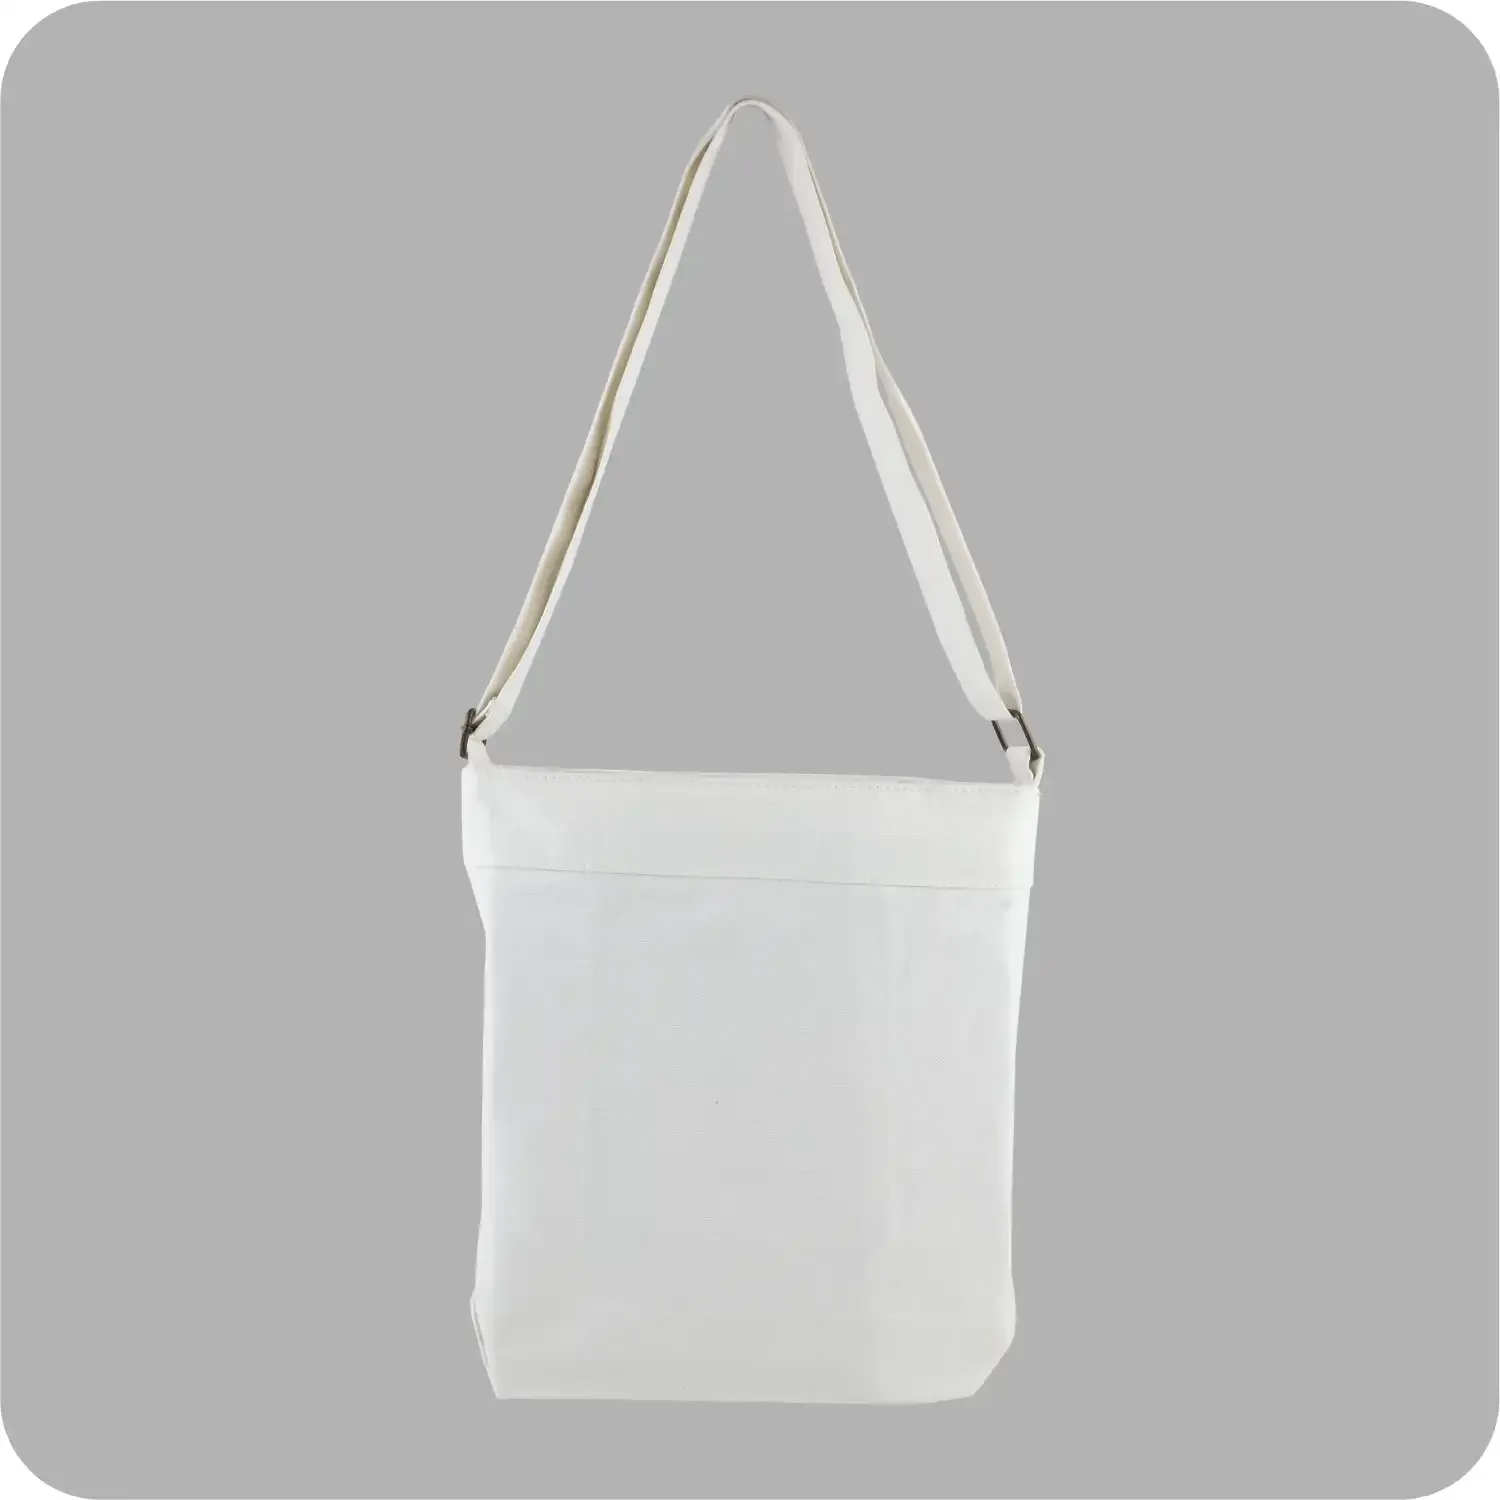 Dashy Cross Body Handle Style Exclusively for Teenagers Off-white Canvas Bags